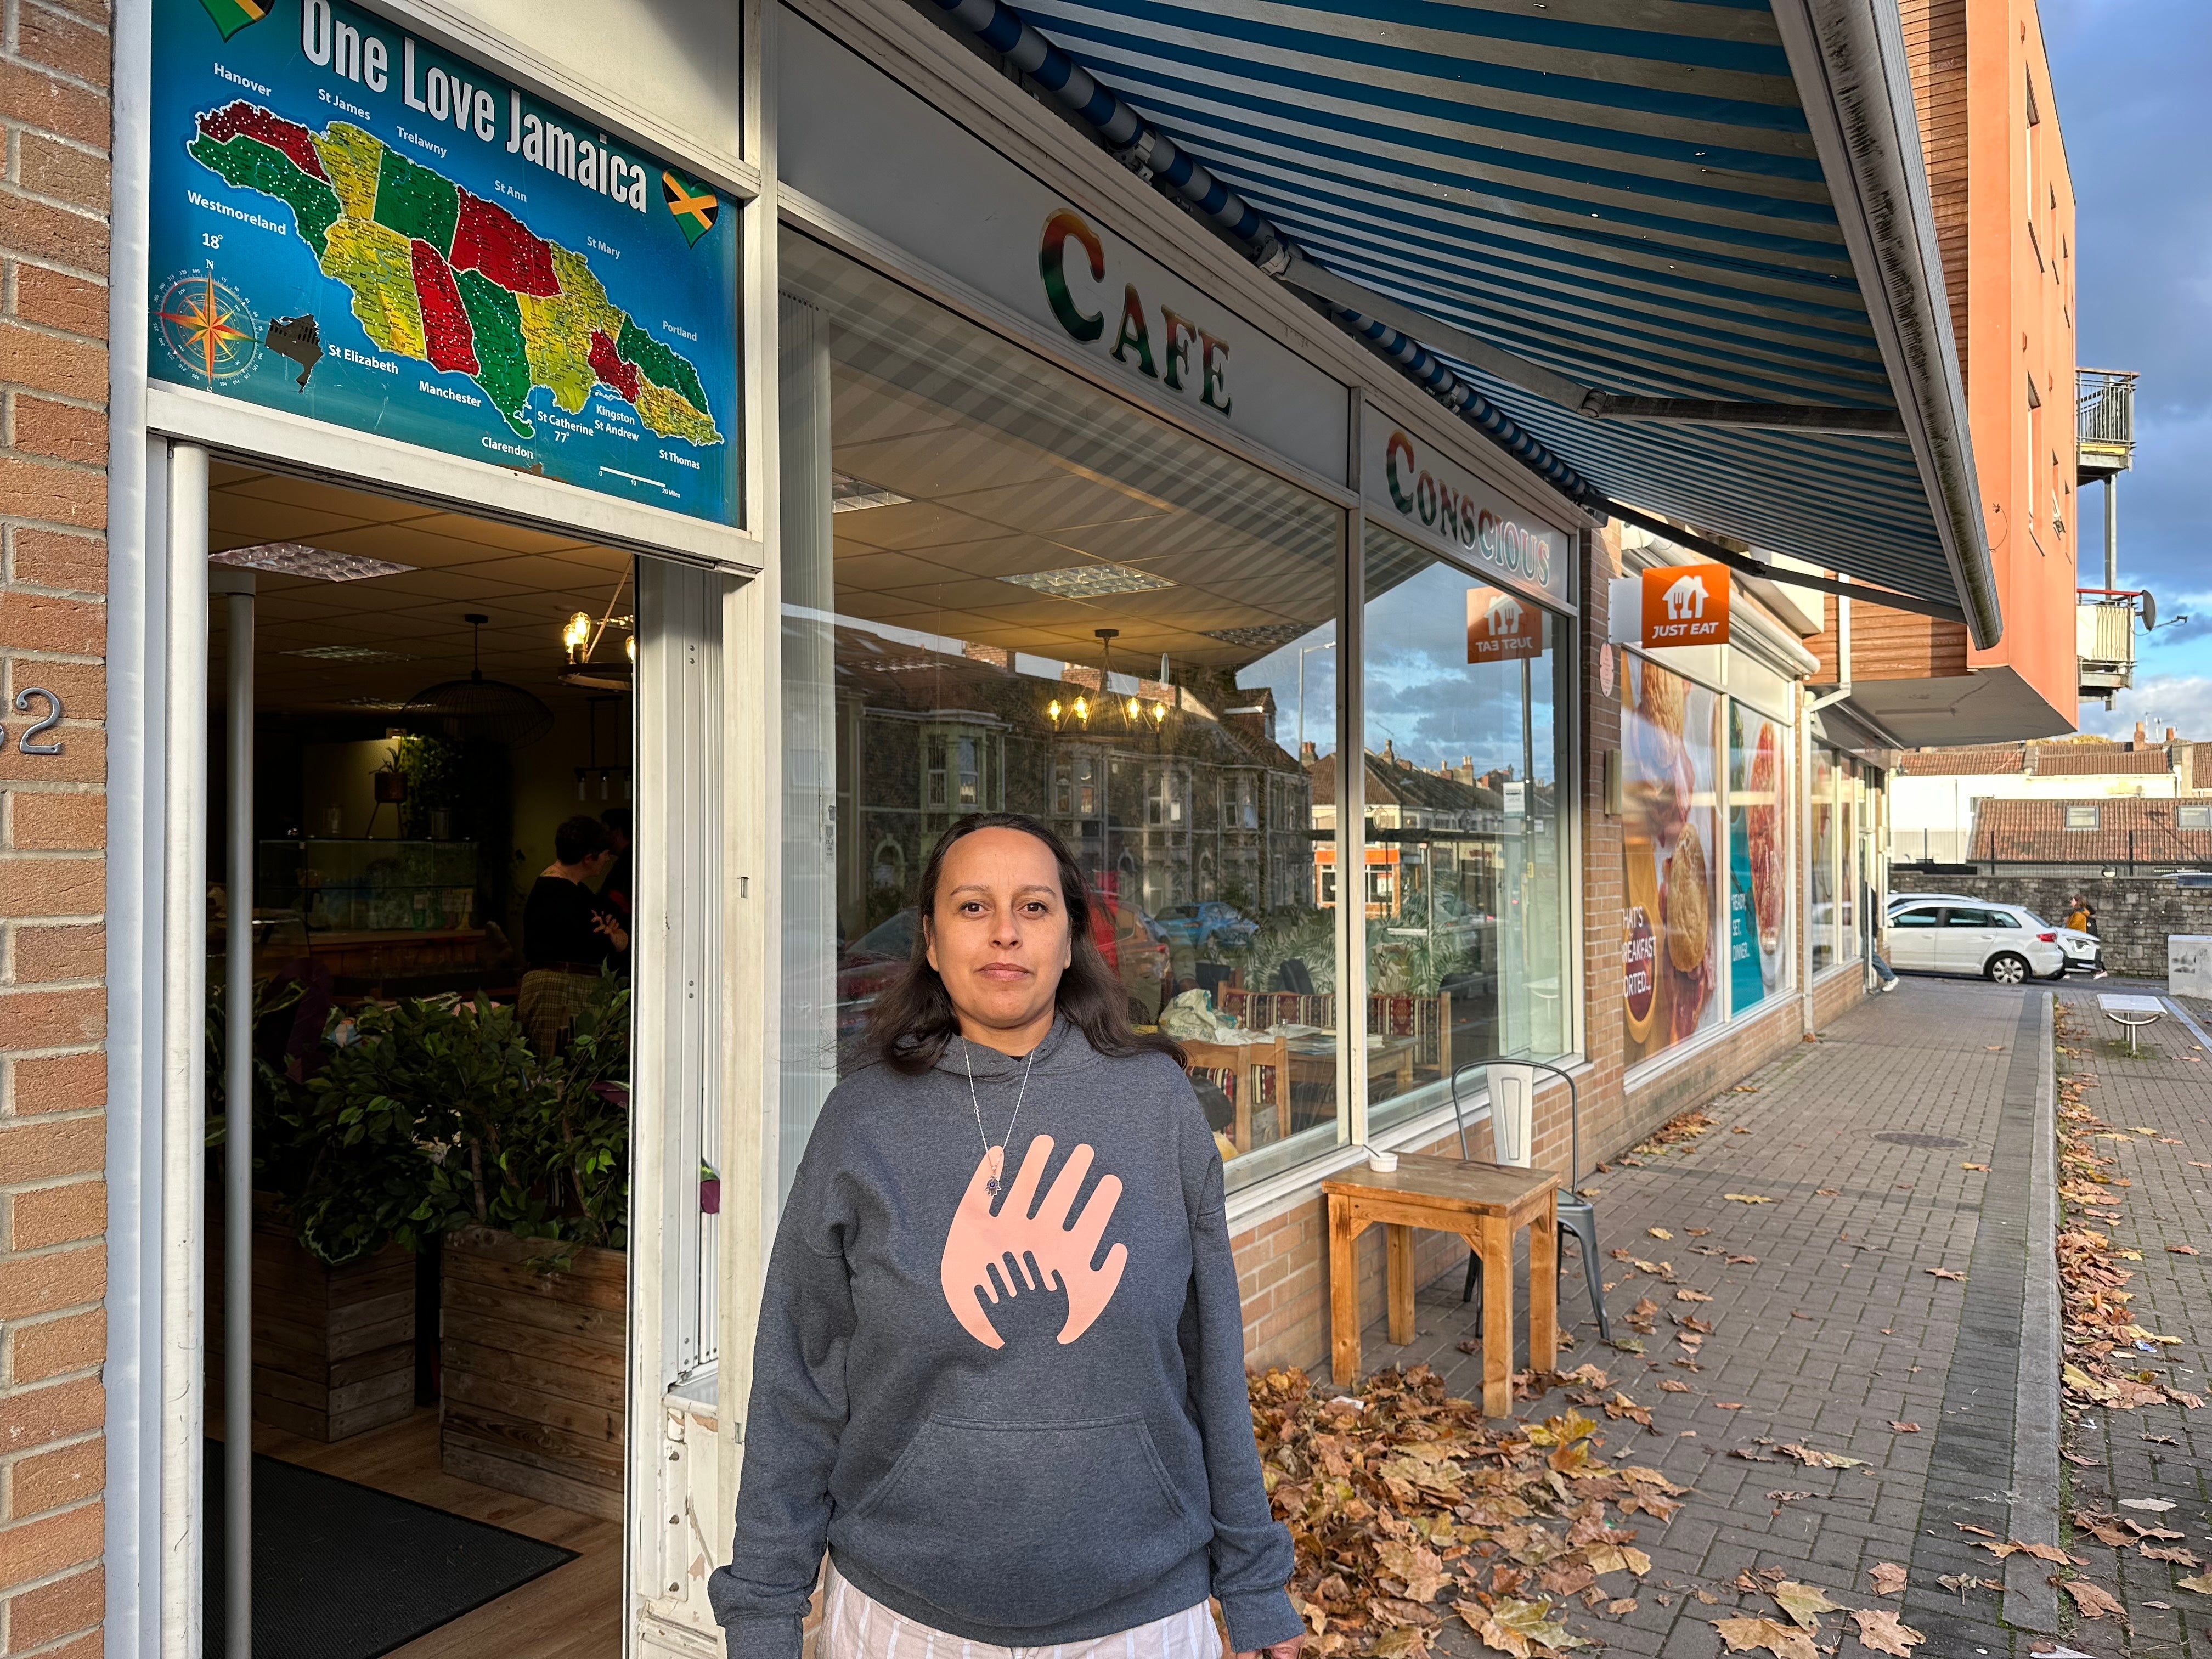 Help is being given through donations held at Cafe Conscious which joint owner Deniece Dixon opened after the evacuation